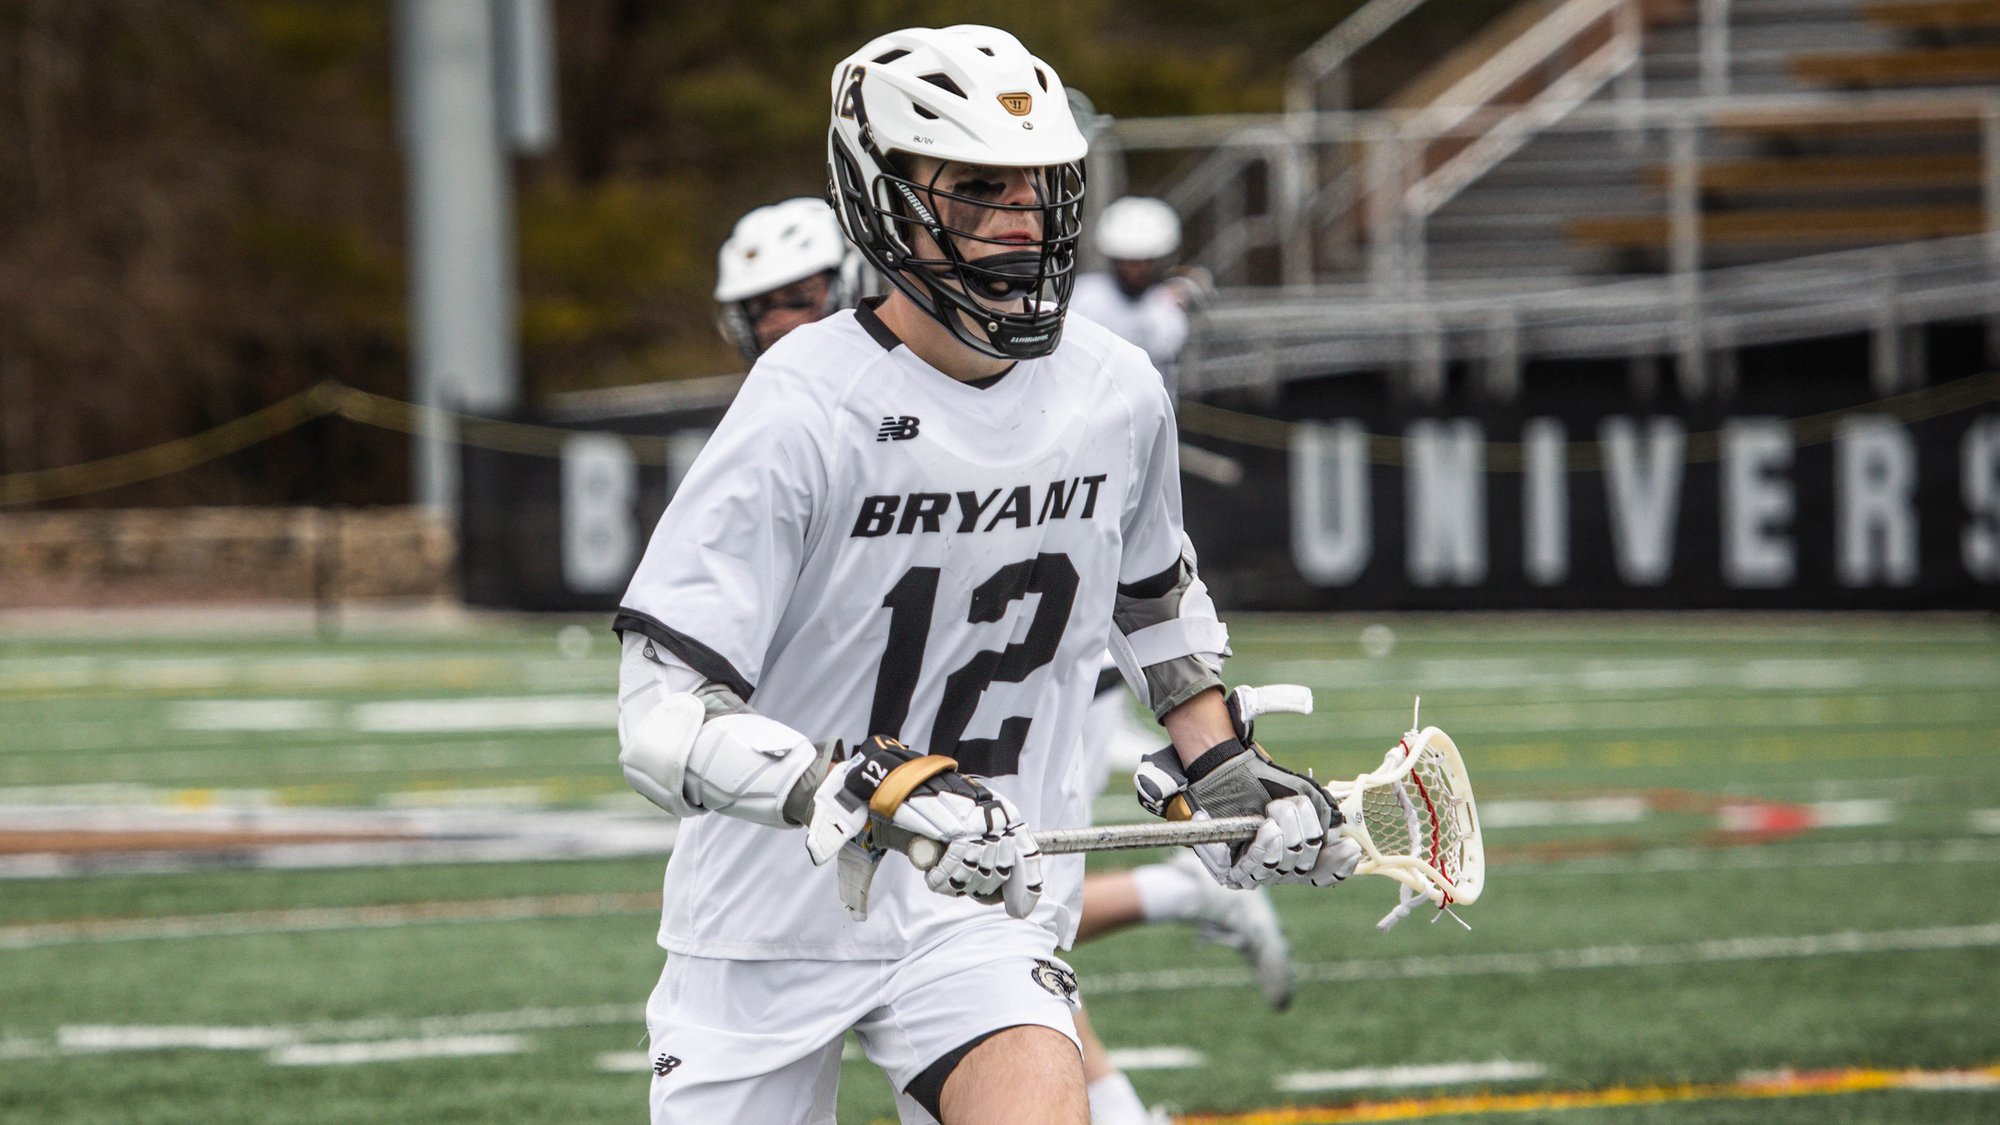 Bryant improves to 3-0 in America East with win over NJIT